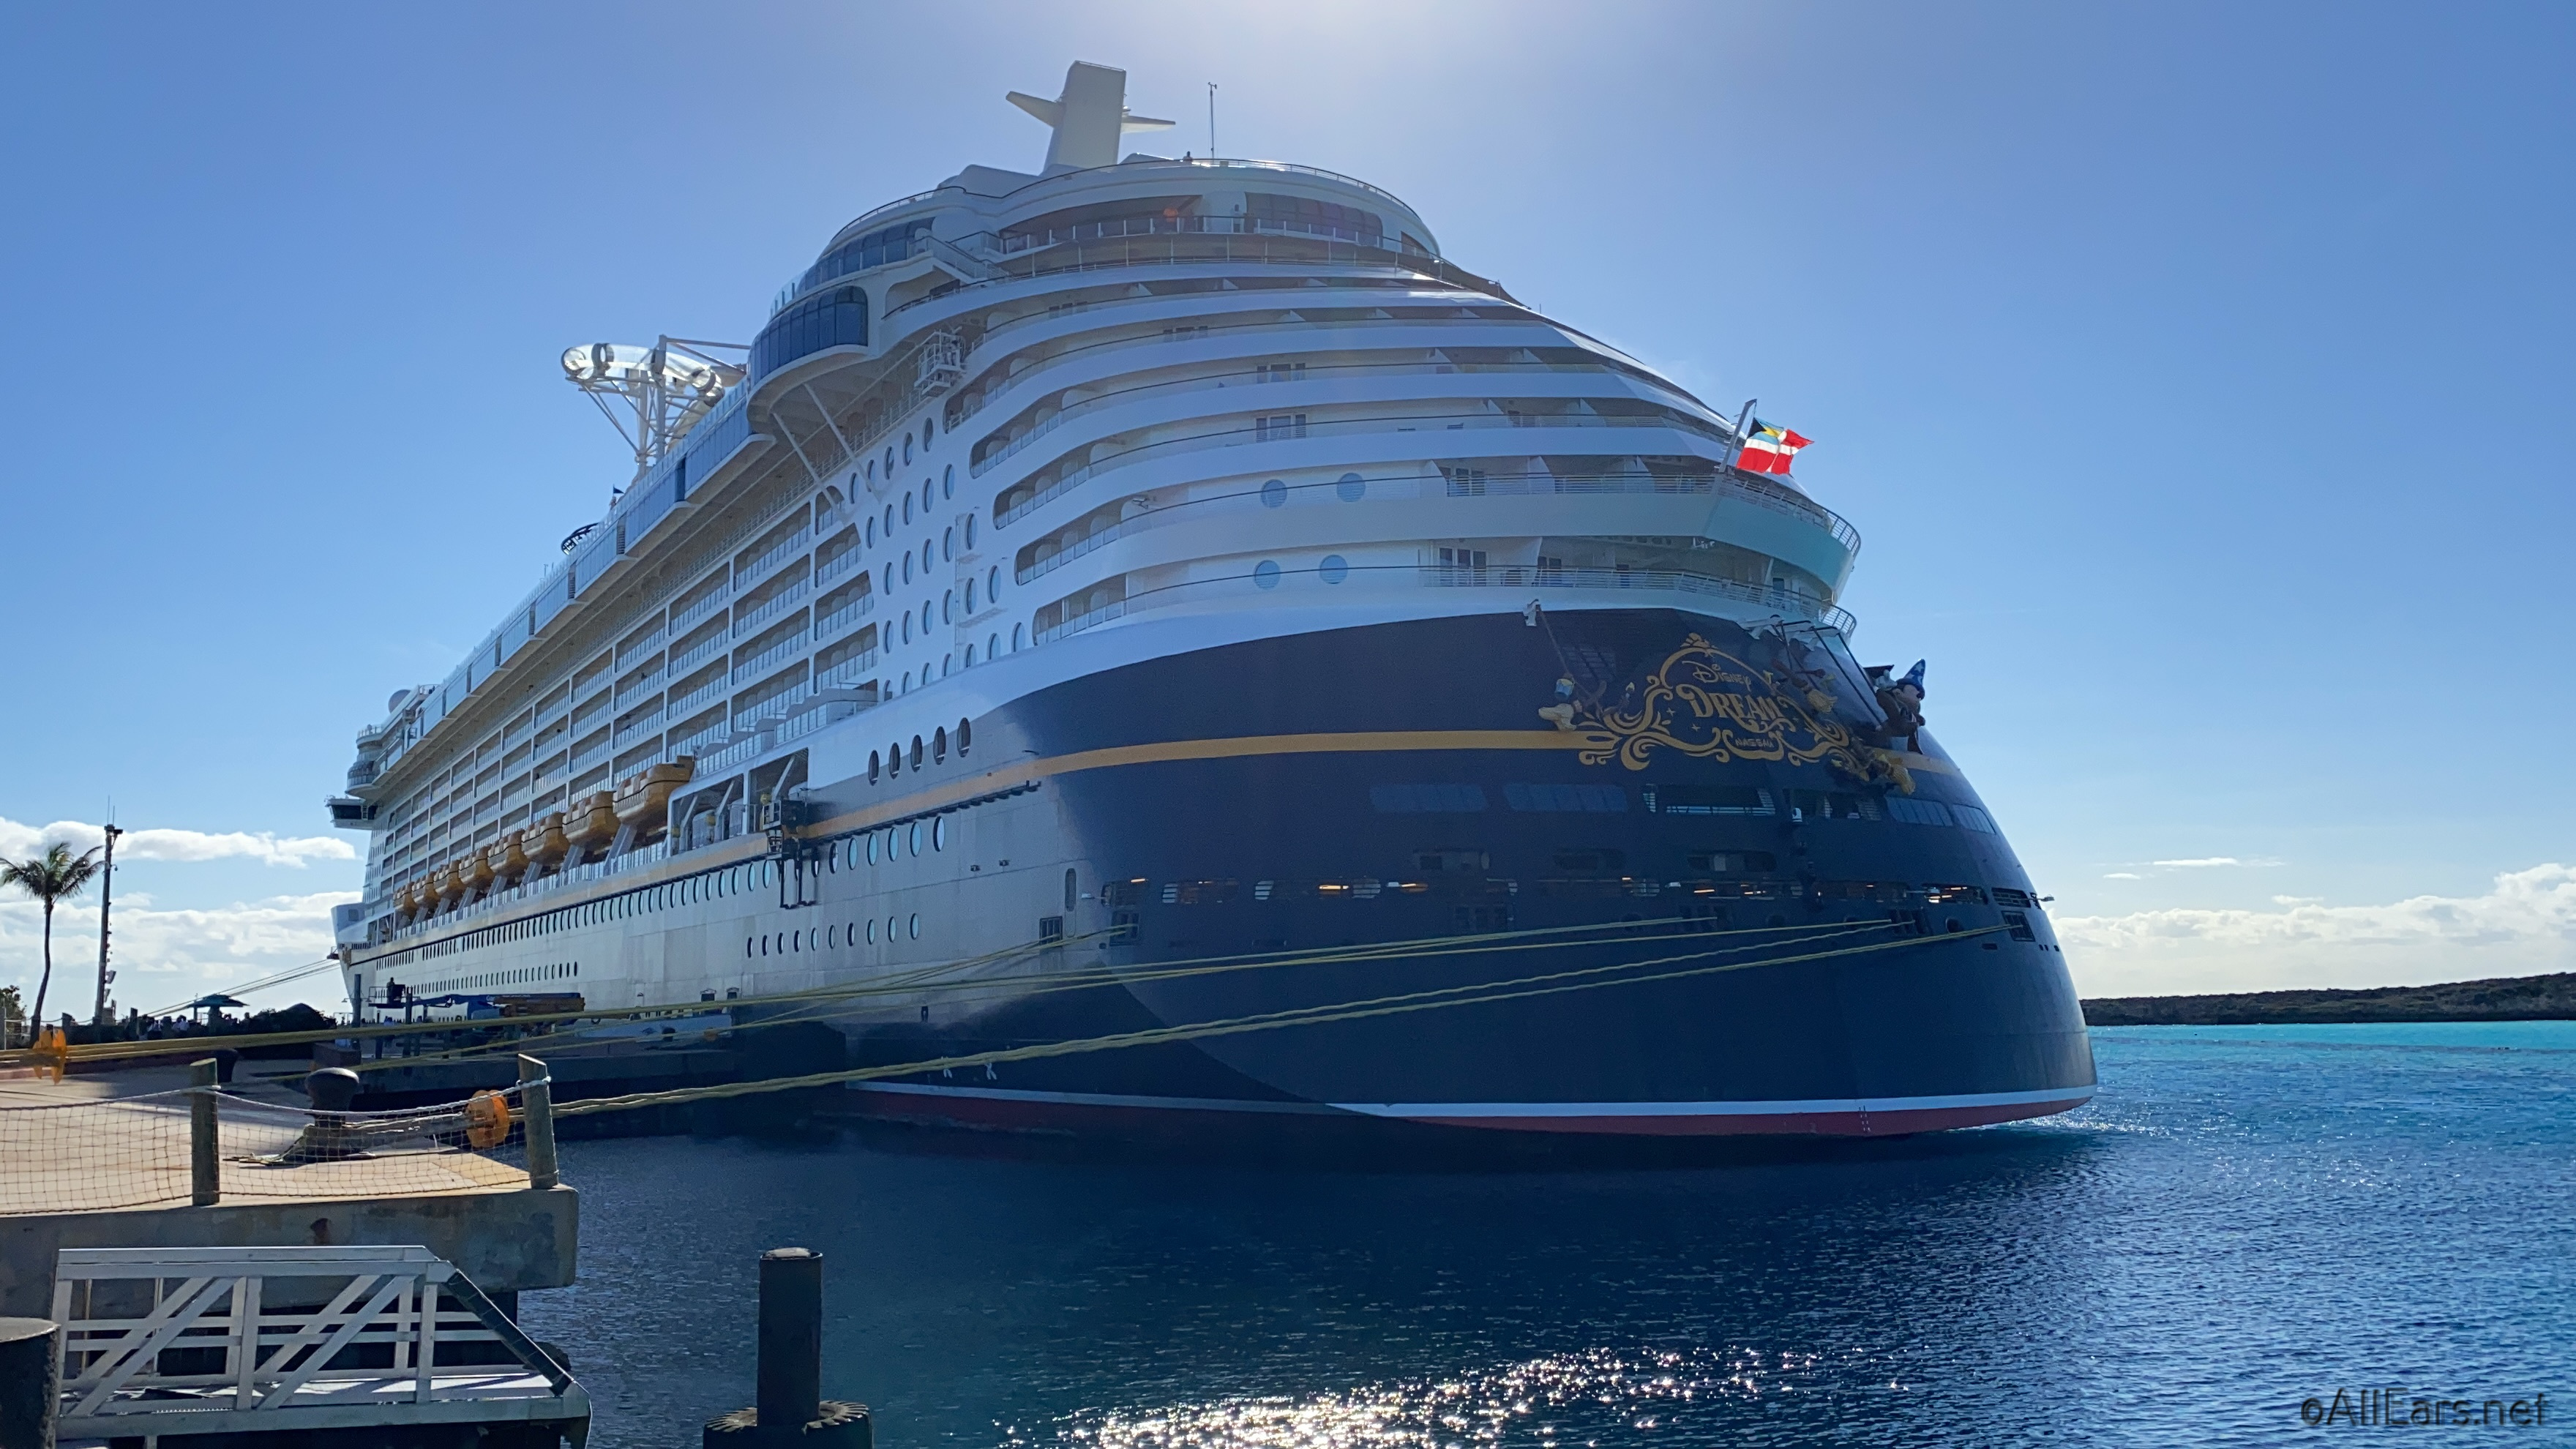 NEWS! Disney Cruise Line Cancels All Departures Through 2020 - AllEars.Net